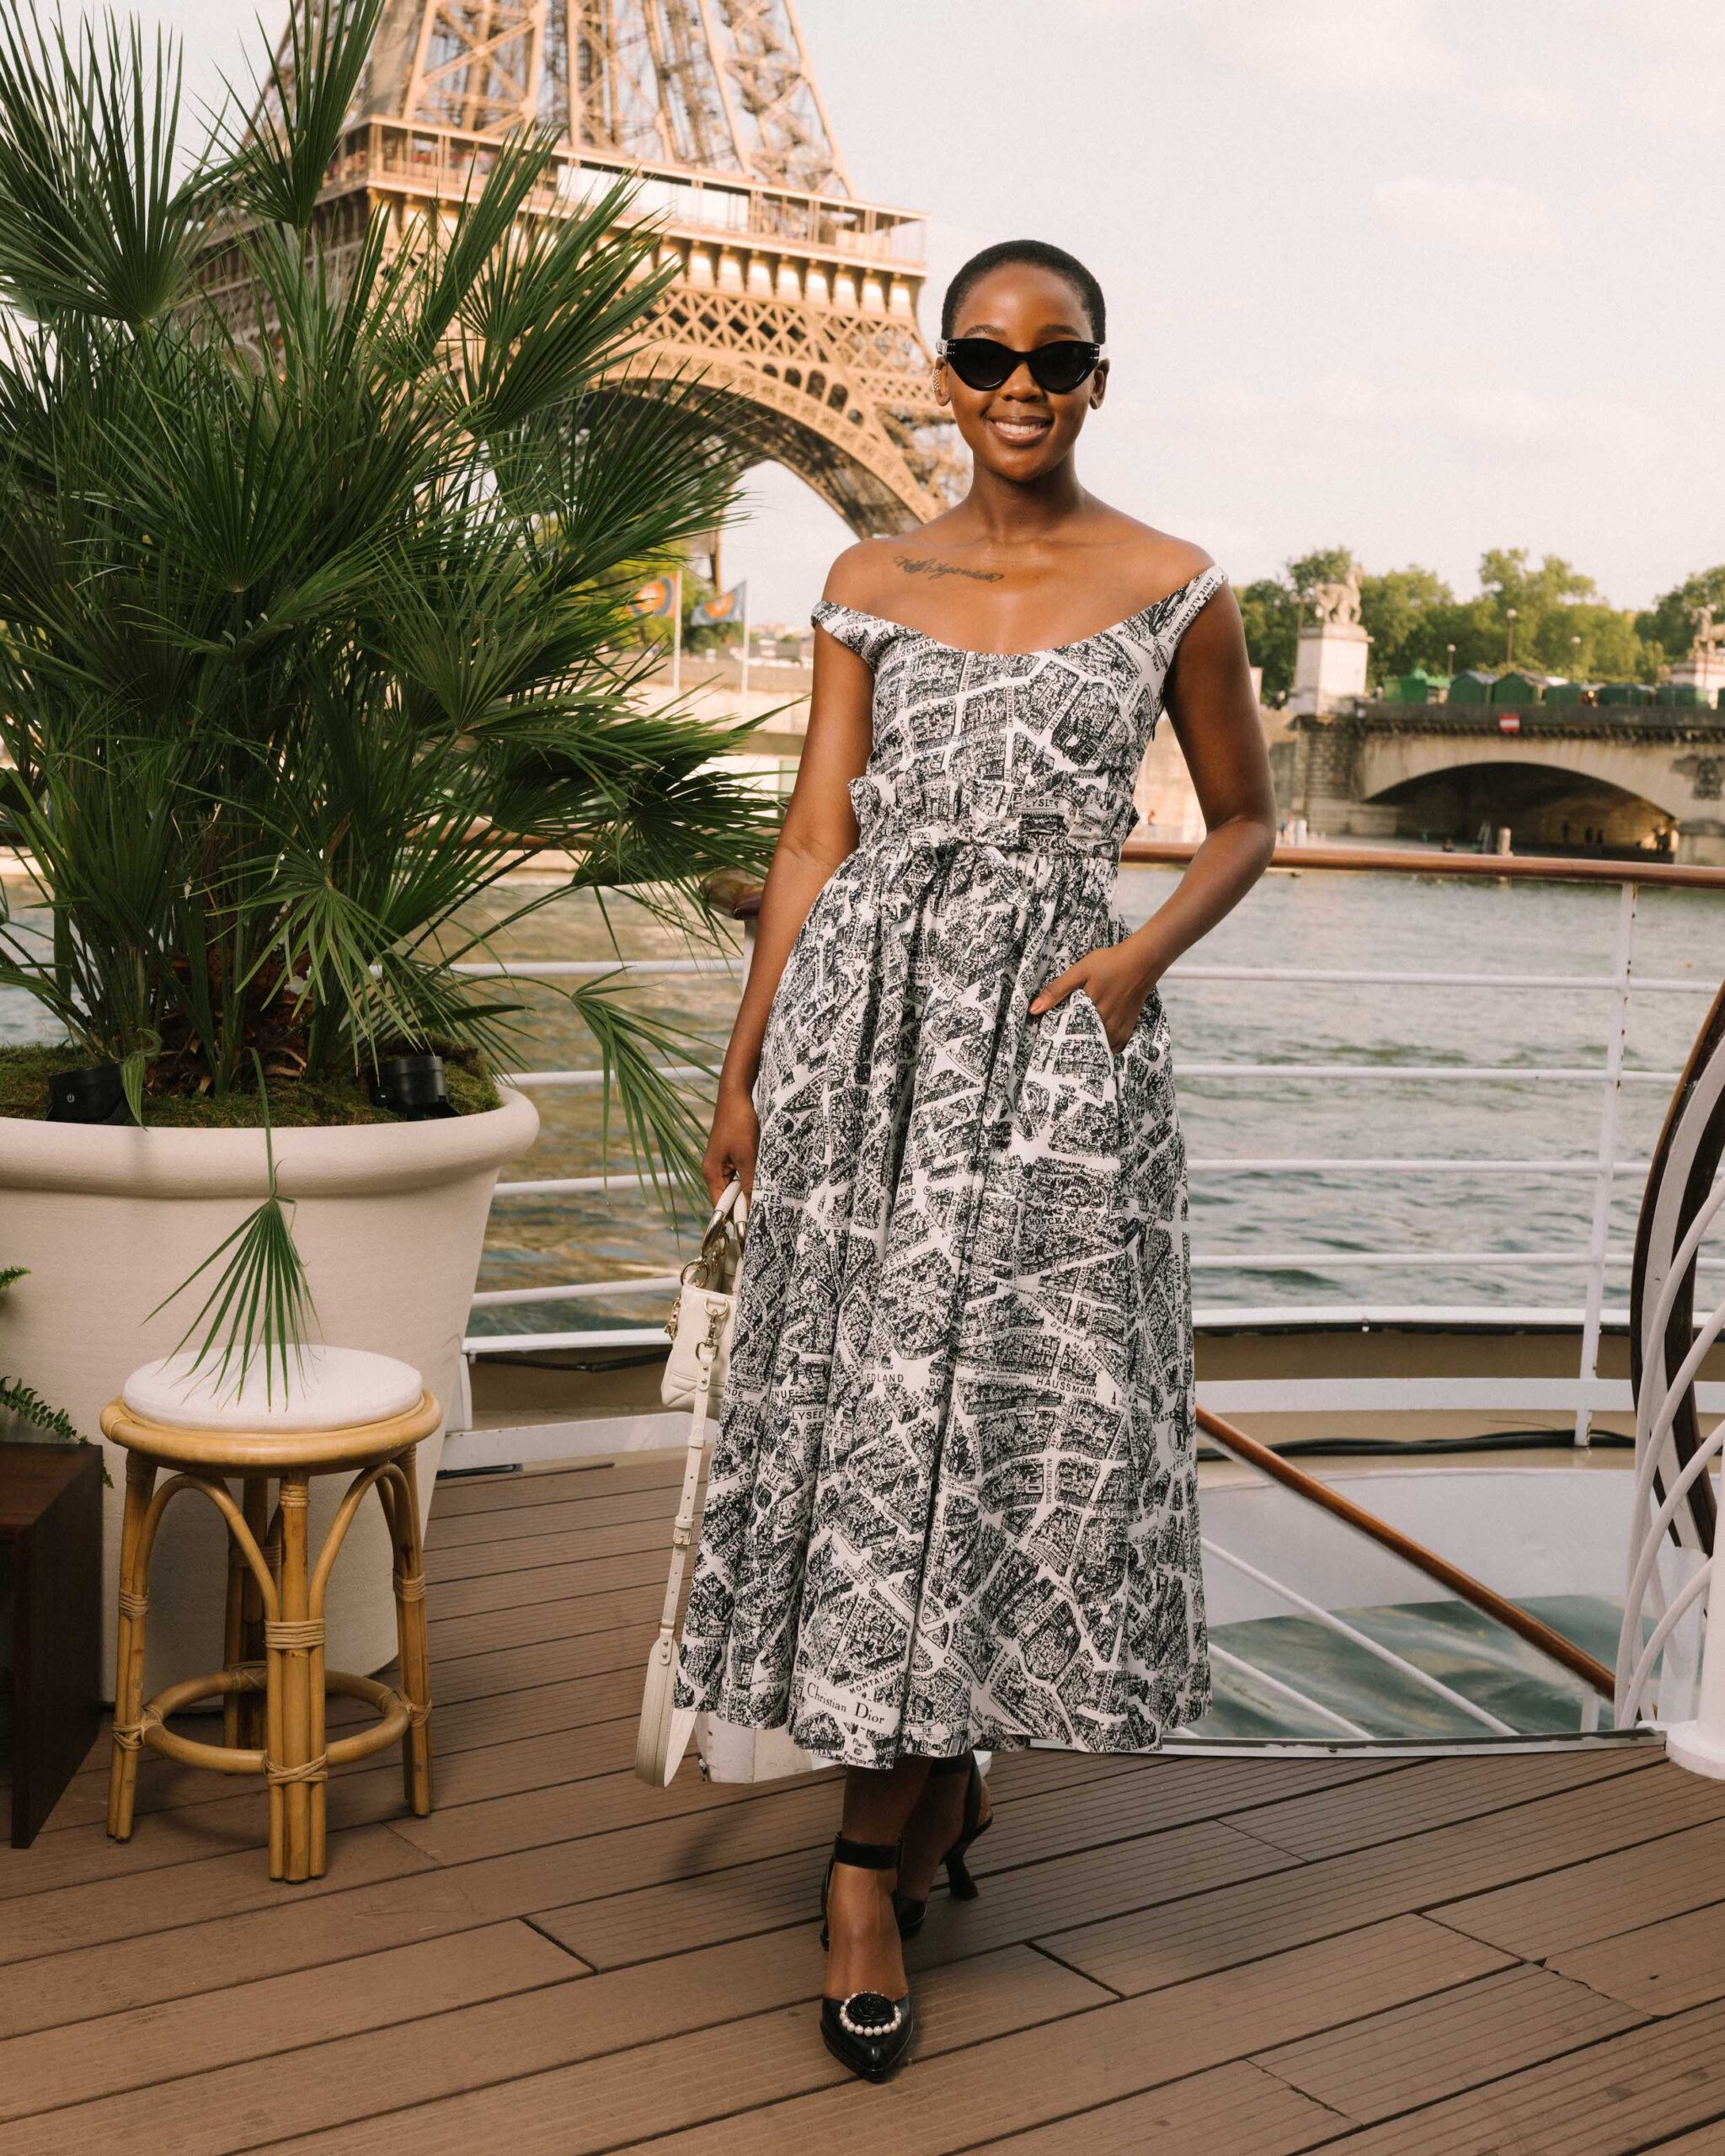 Thuso Mbedu in Dior Spring-Summer 2023 Thuso Mbedu made a statement in a printed white and black cotton dress from the Dior Spring-Summer 2023 collection. She accessorized with a Dior bag, sunglasses, and shoes.